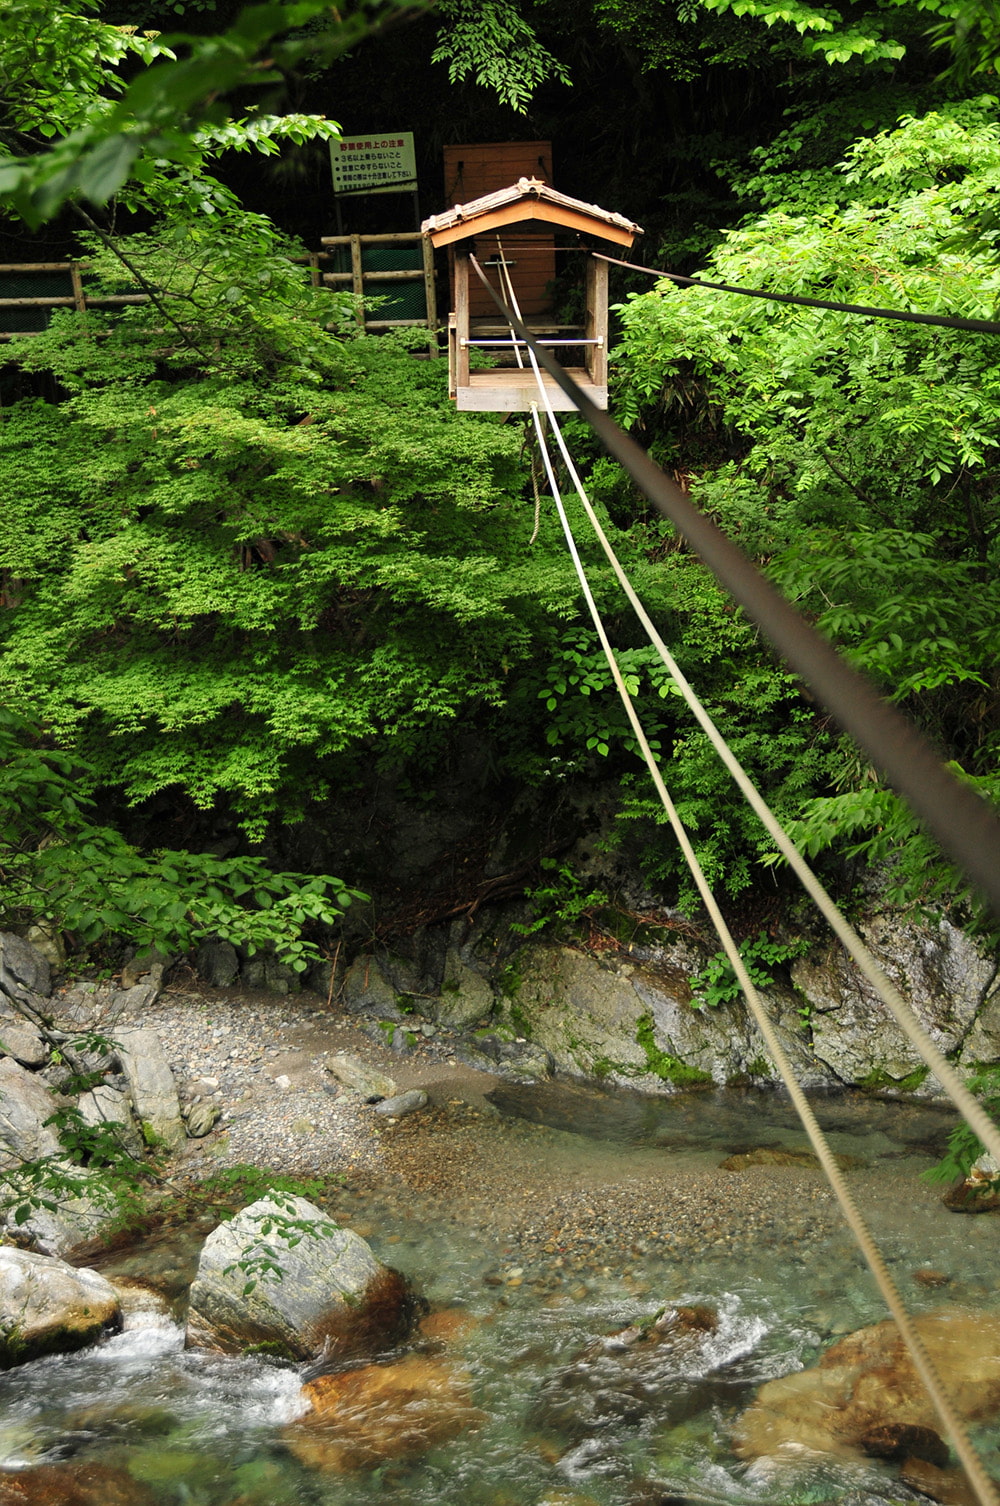 Off the beaten track in Japan Iya Valley